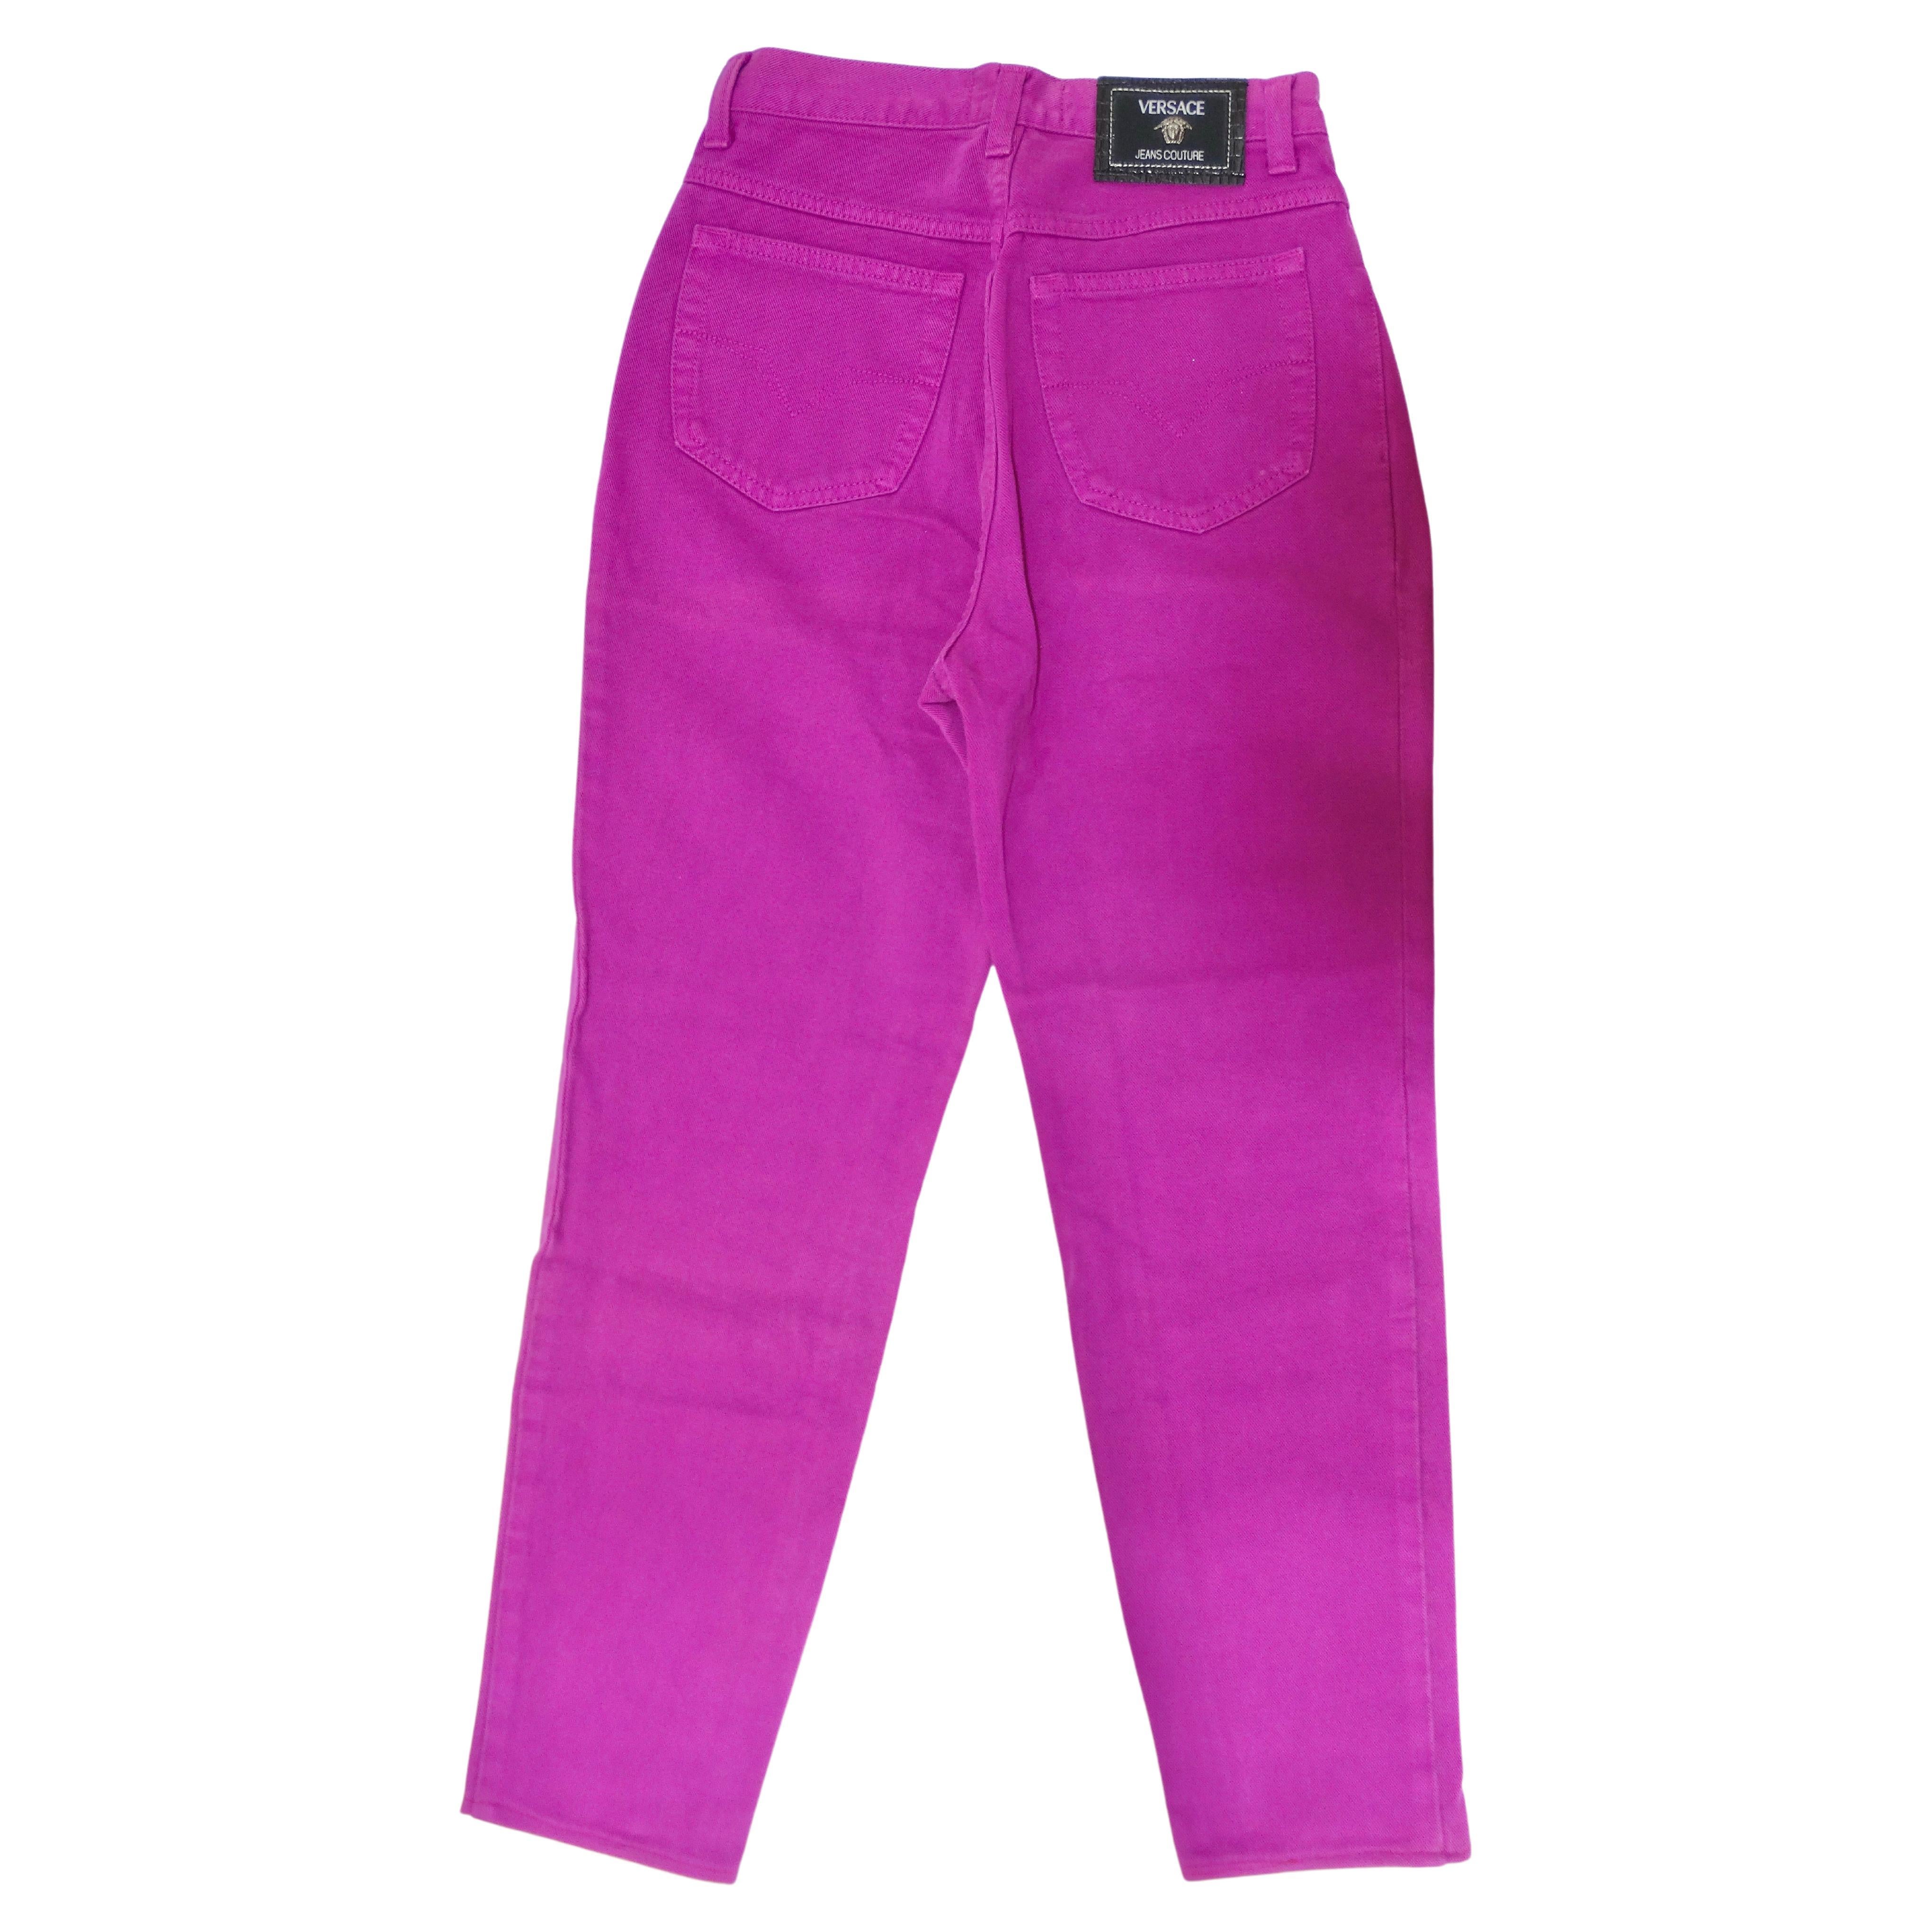 Pretty in purple! Stand out in these vibrant pair of jeans by Versace Jeans Couture straight out of the 1990's. These feature a soft worn denim, button closure, and tapered leg. Pair these jeans with some Prada chunky boots and a Jean Paul Gautier